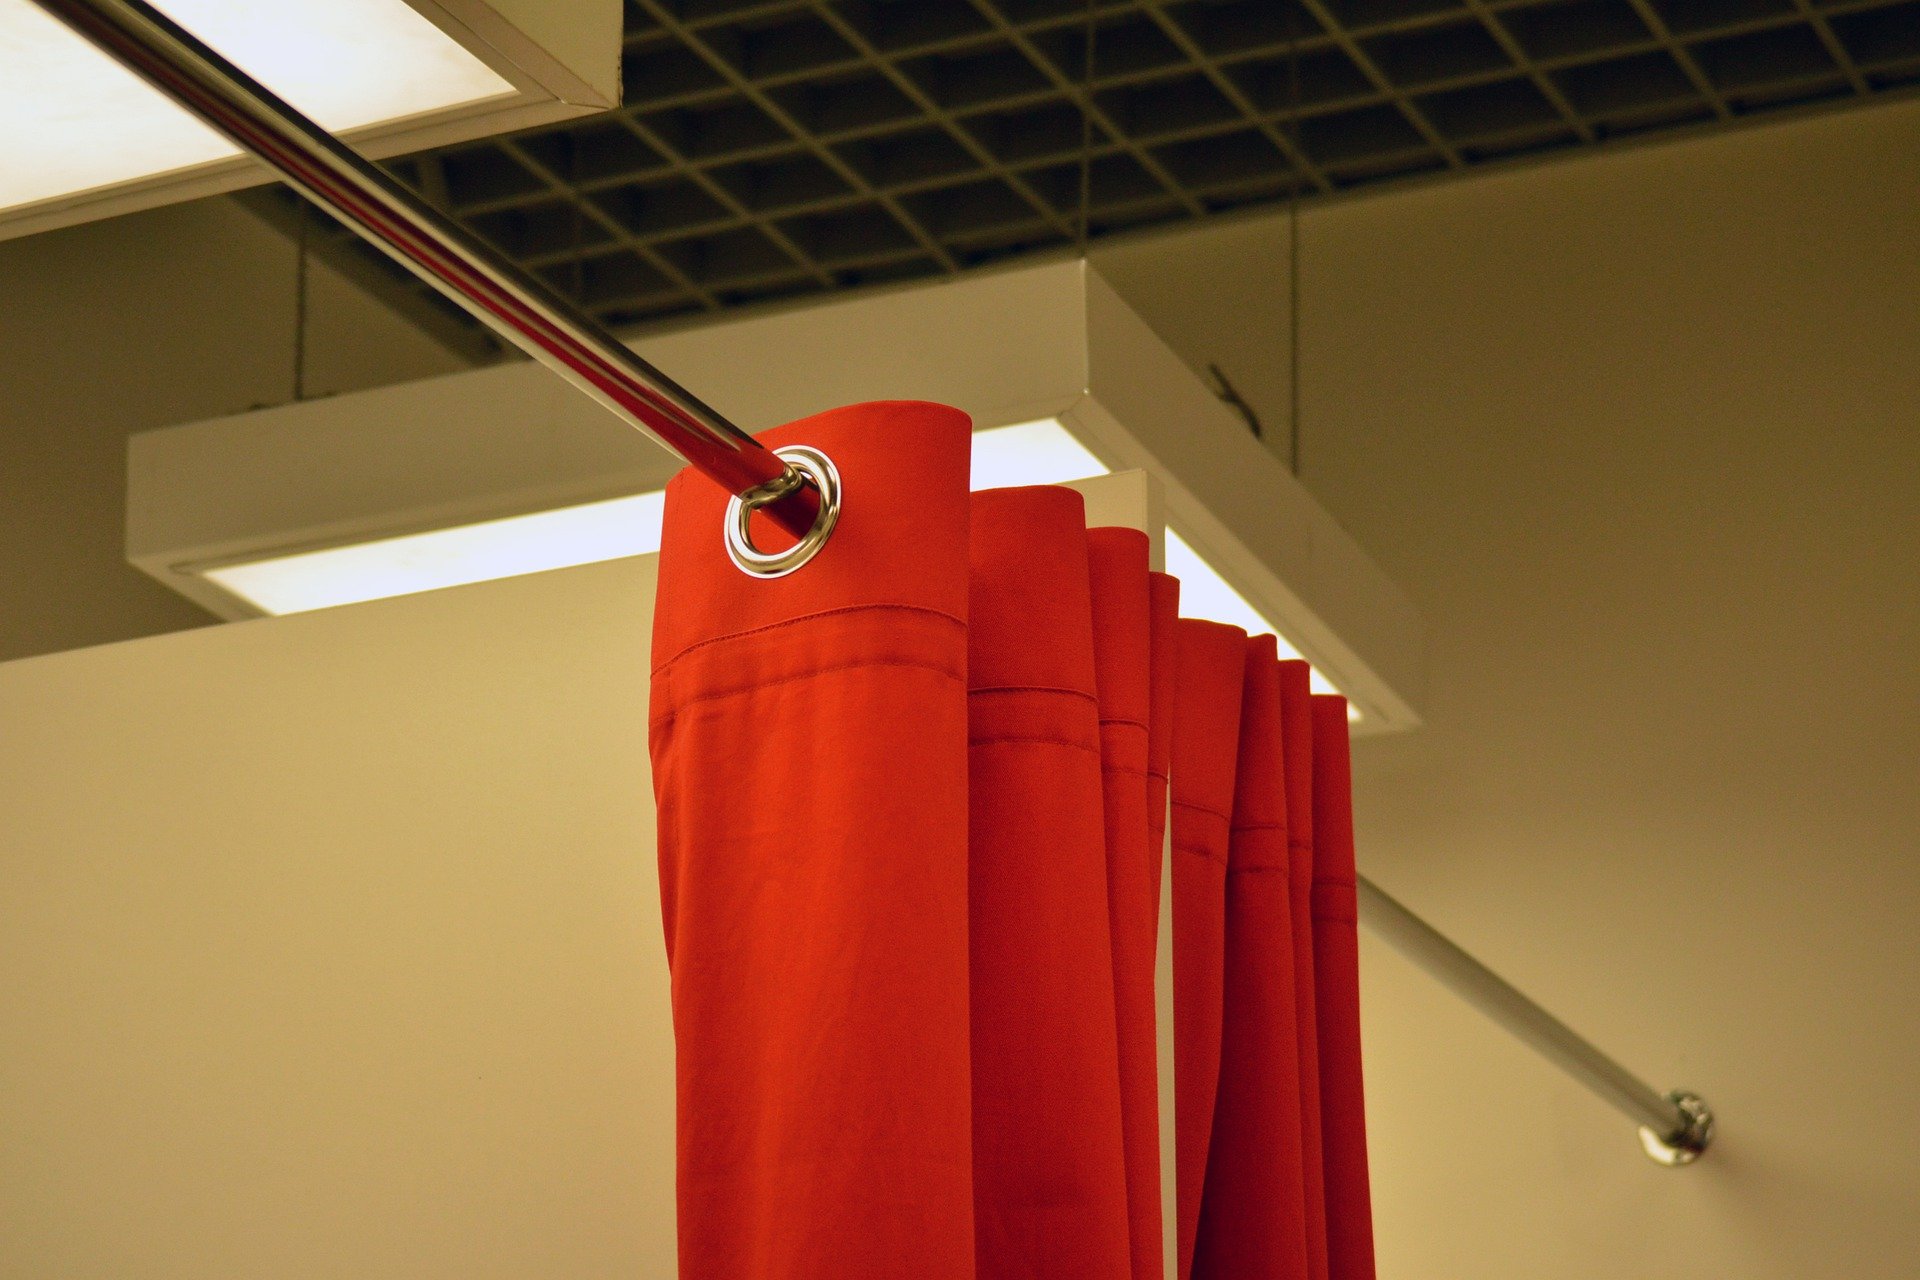 Pictured - A curtain dressing room at a store | Source: Pexels 